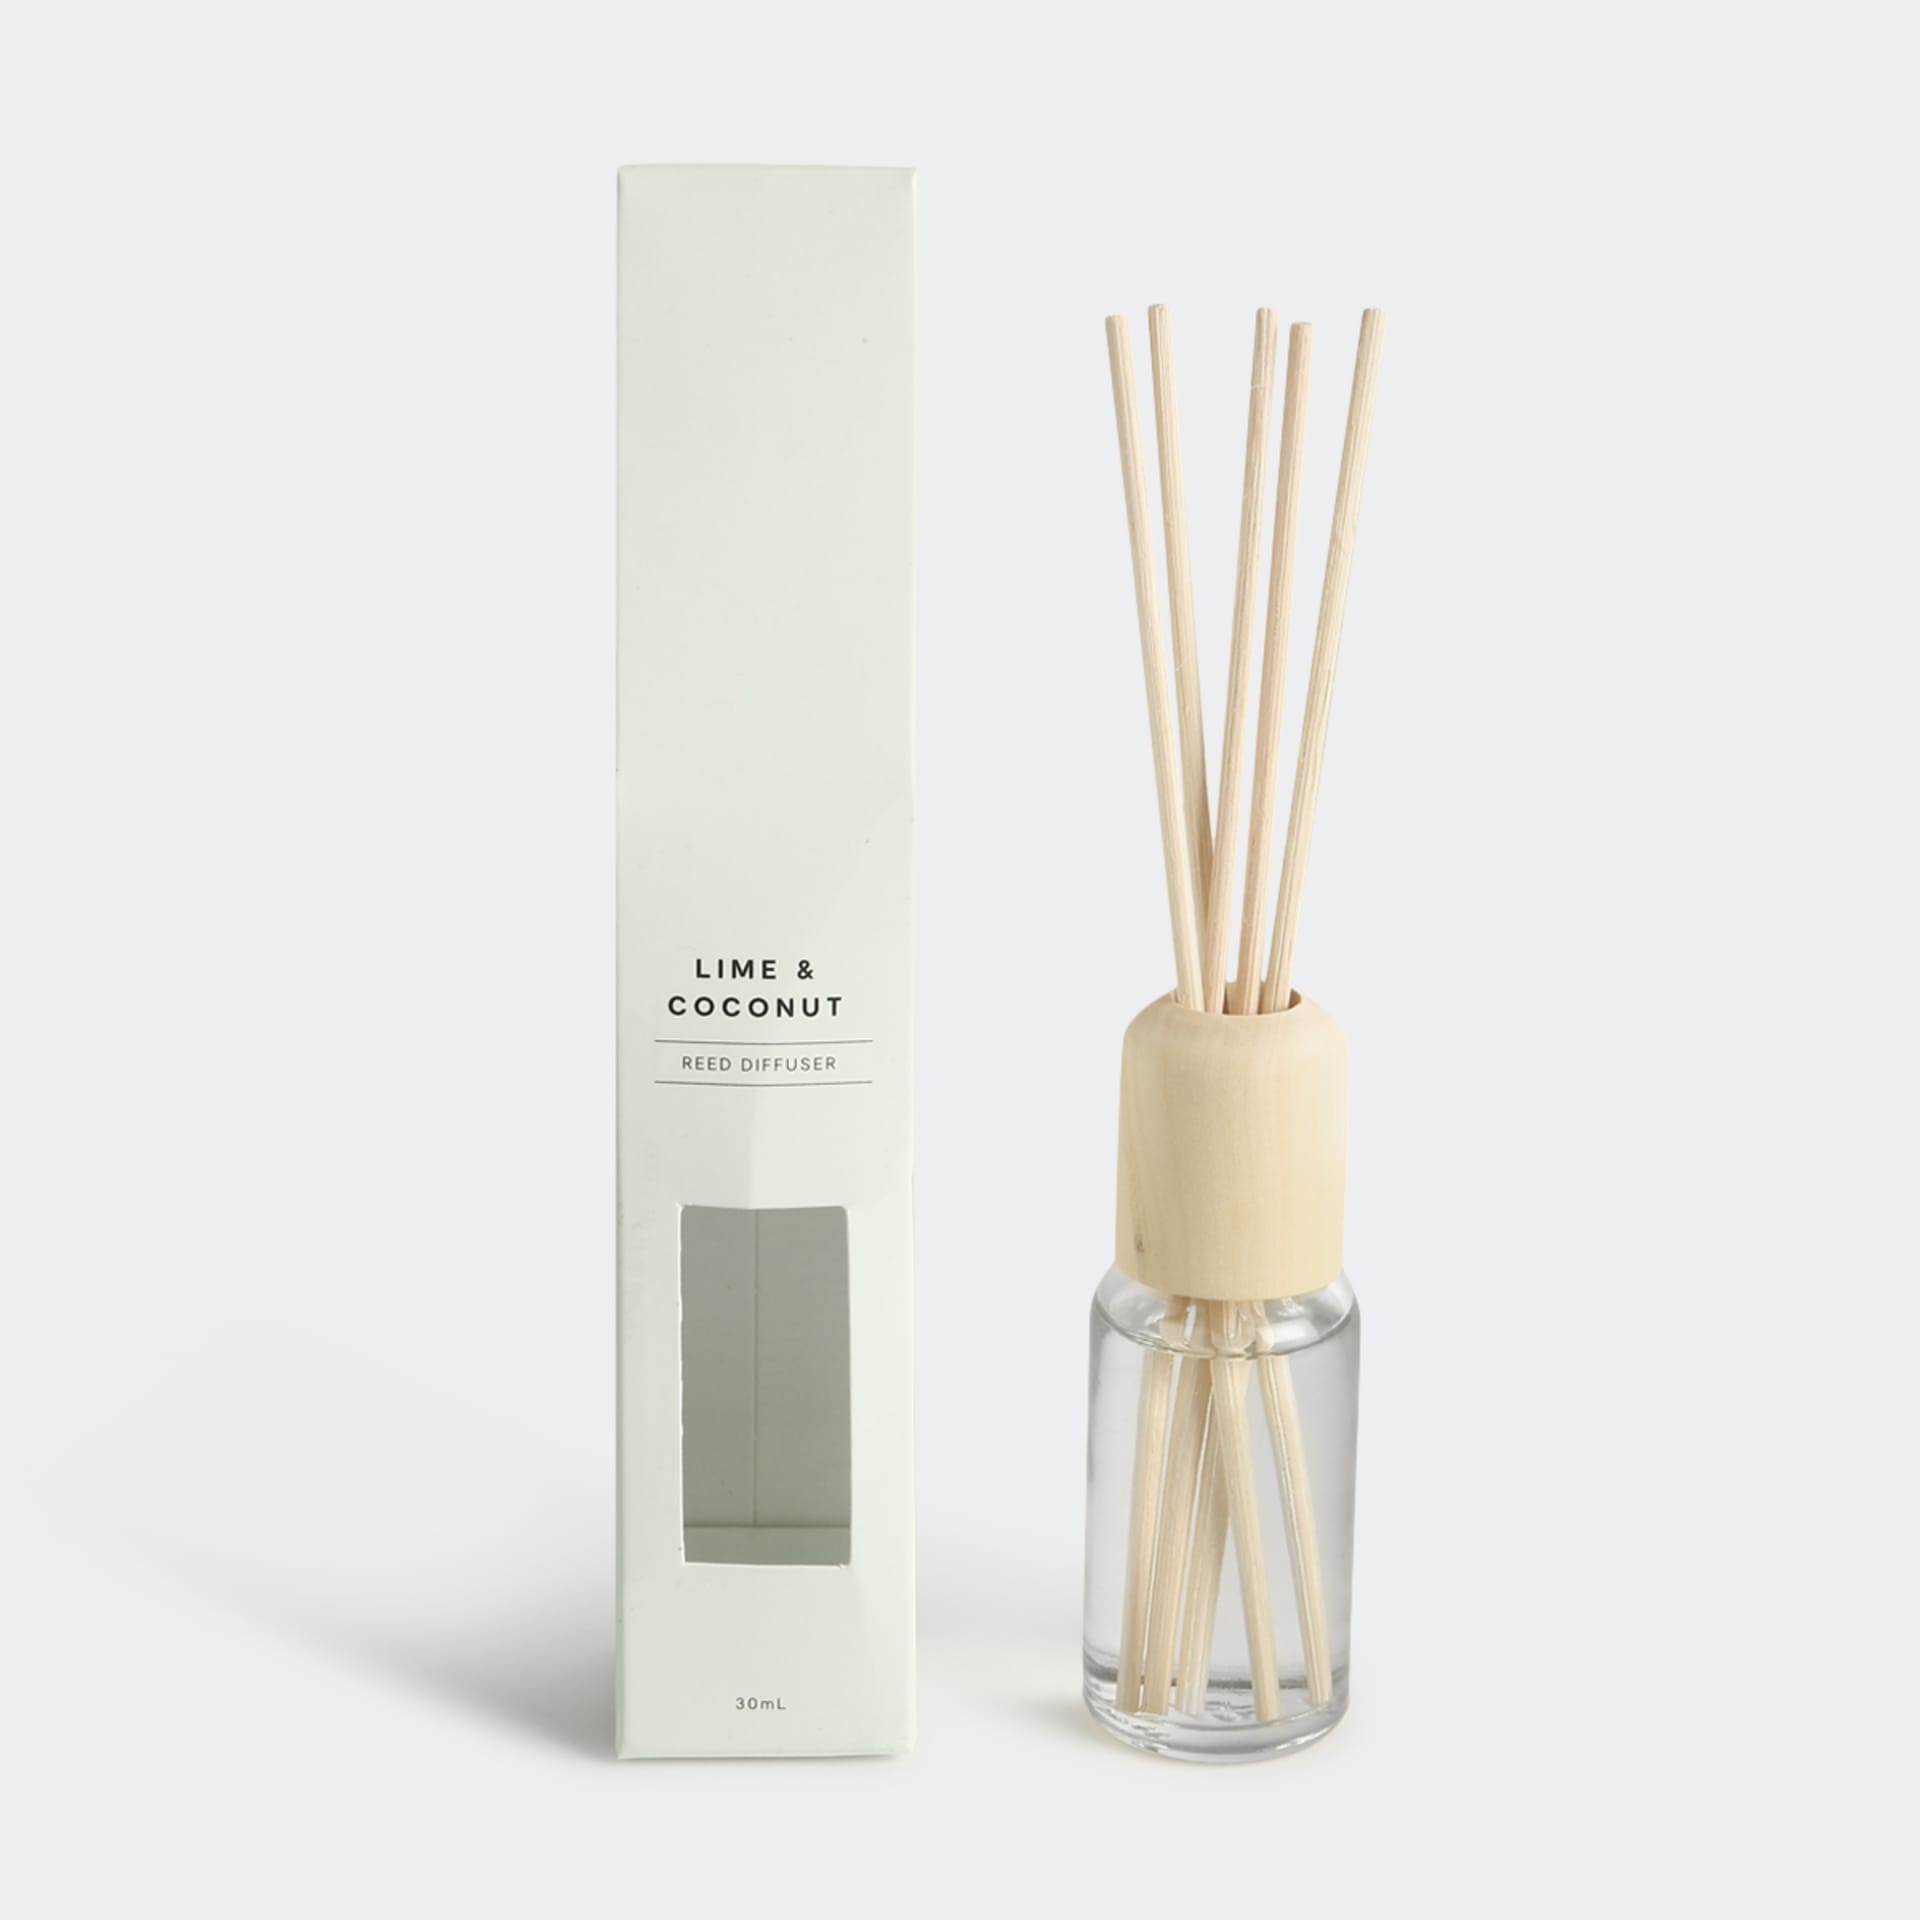 Lime and Coconut Reed Diffuser 30ml - Kmart